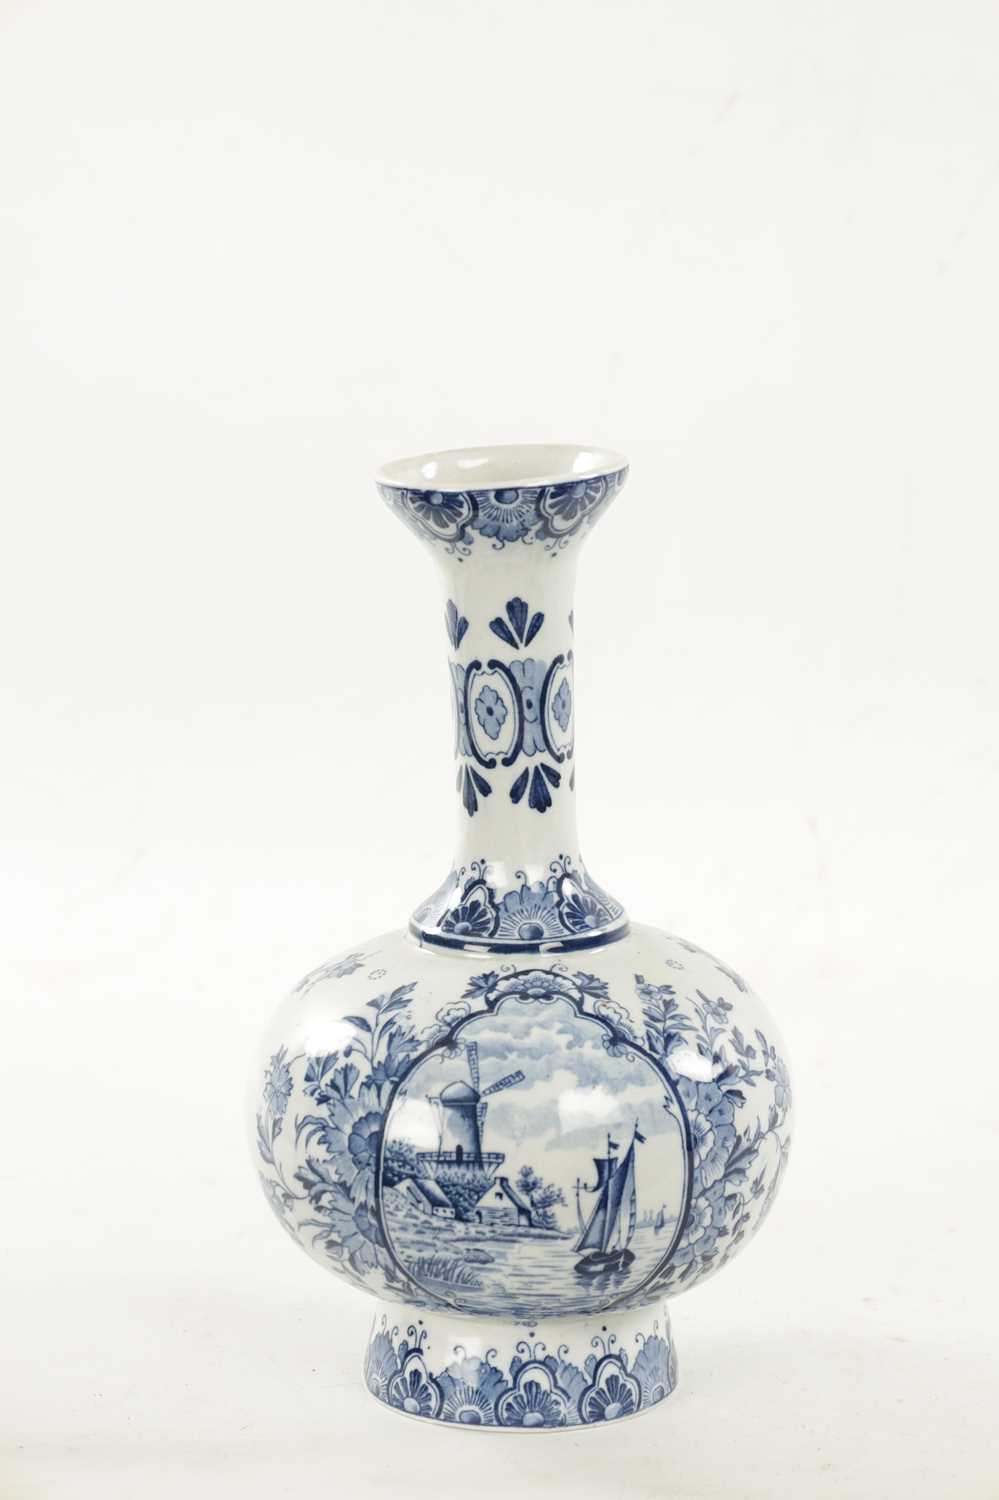 A 19TH CENTURY BLUE AND WHITE DELFT BOTTLE VASE - Image 5 of 7